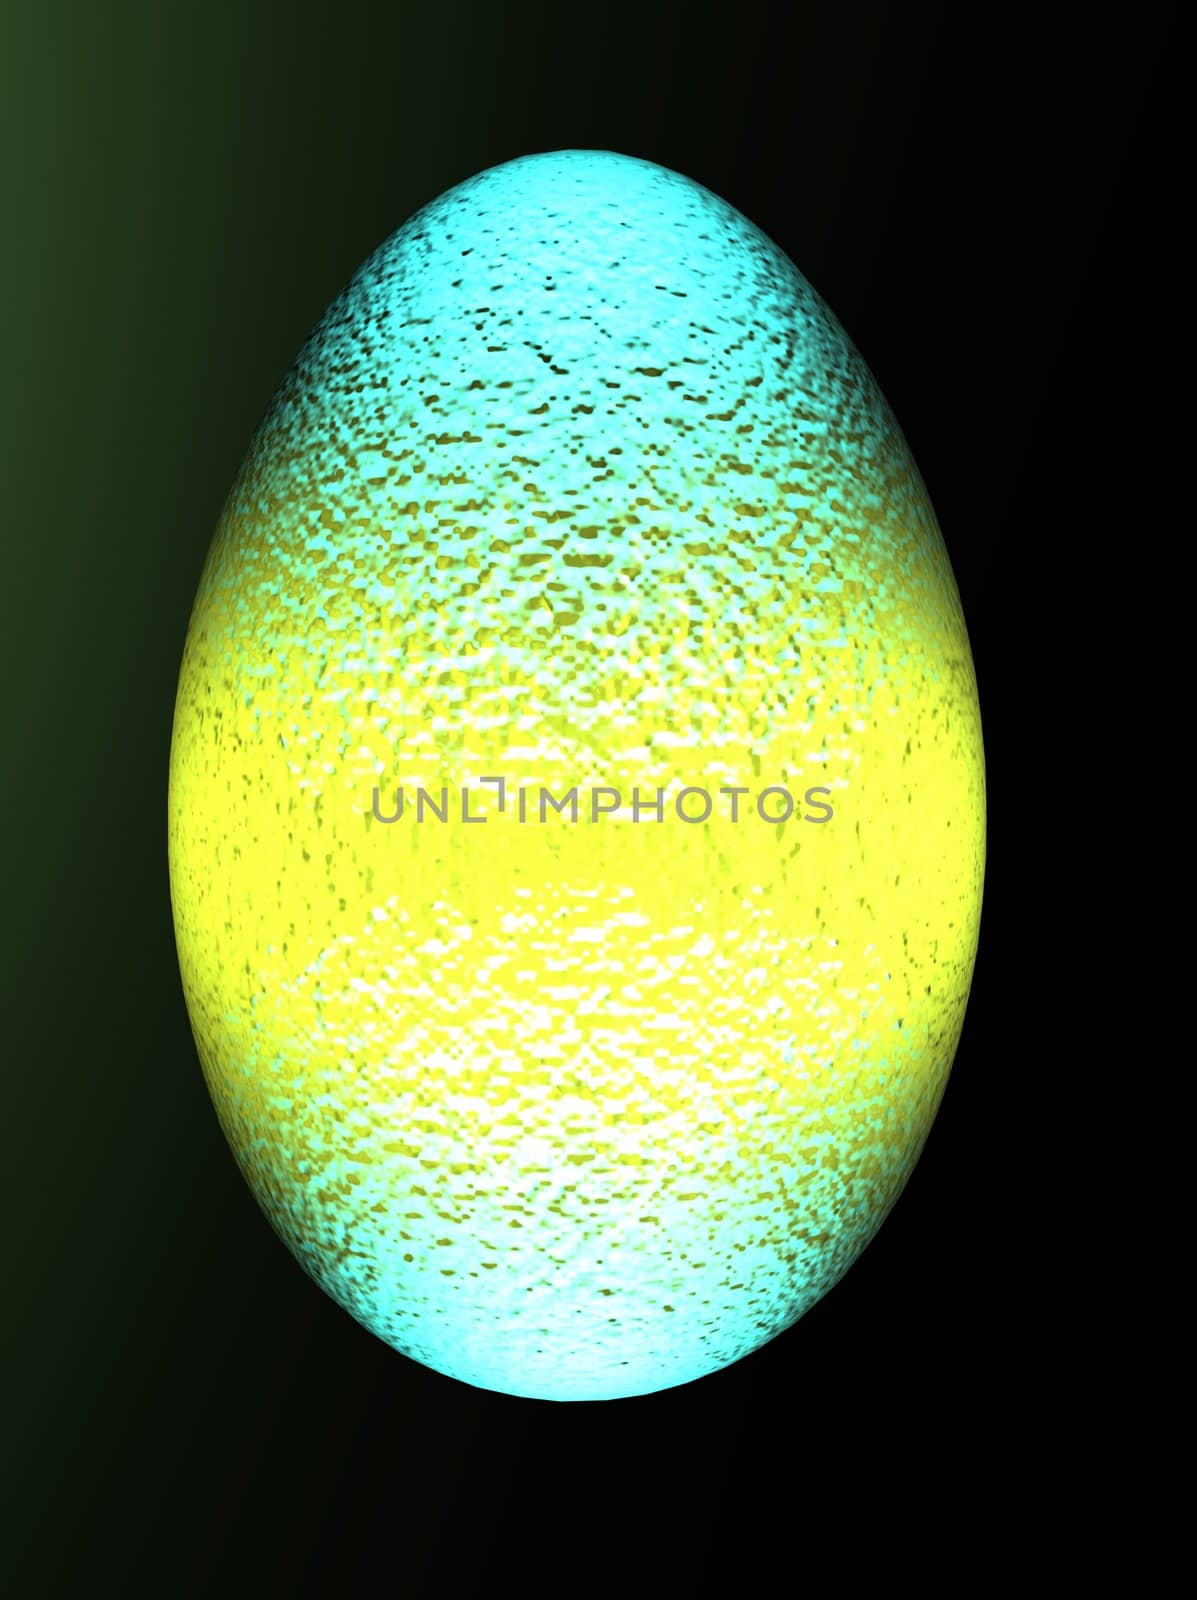 An illustration of a multicolored Easter Egg isolated on black